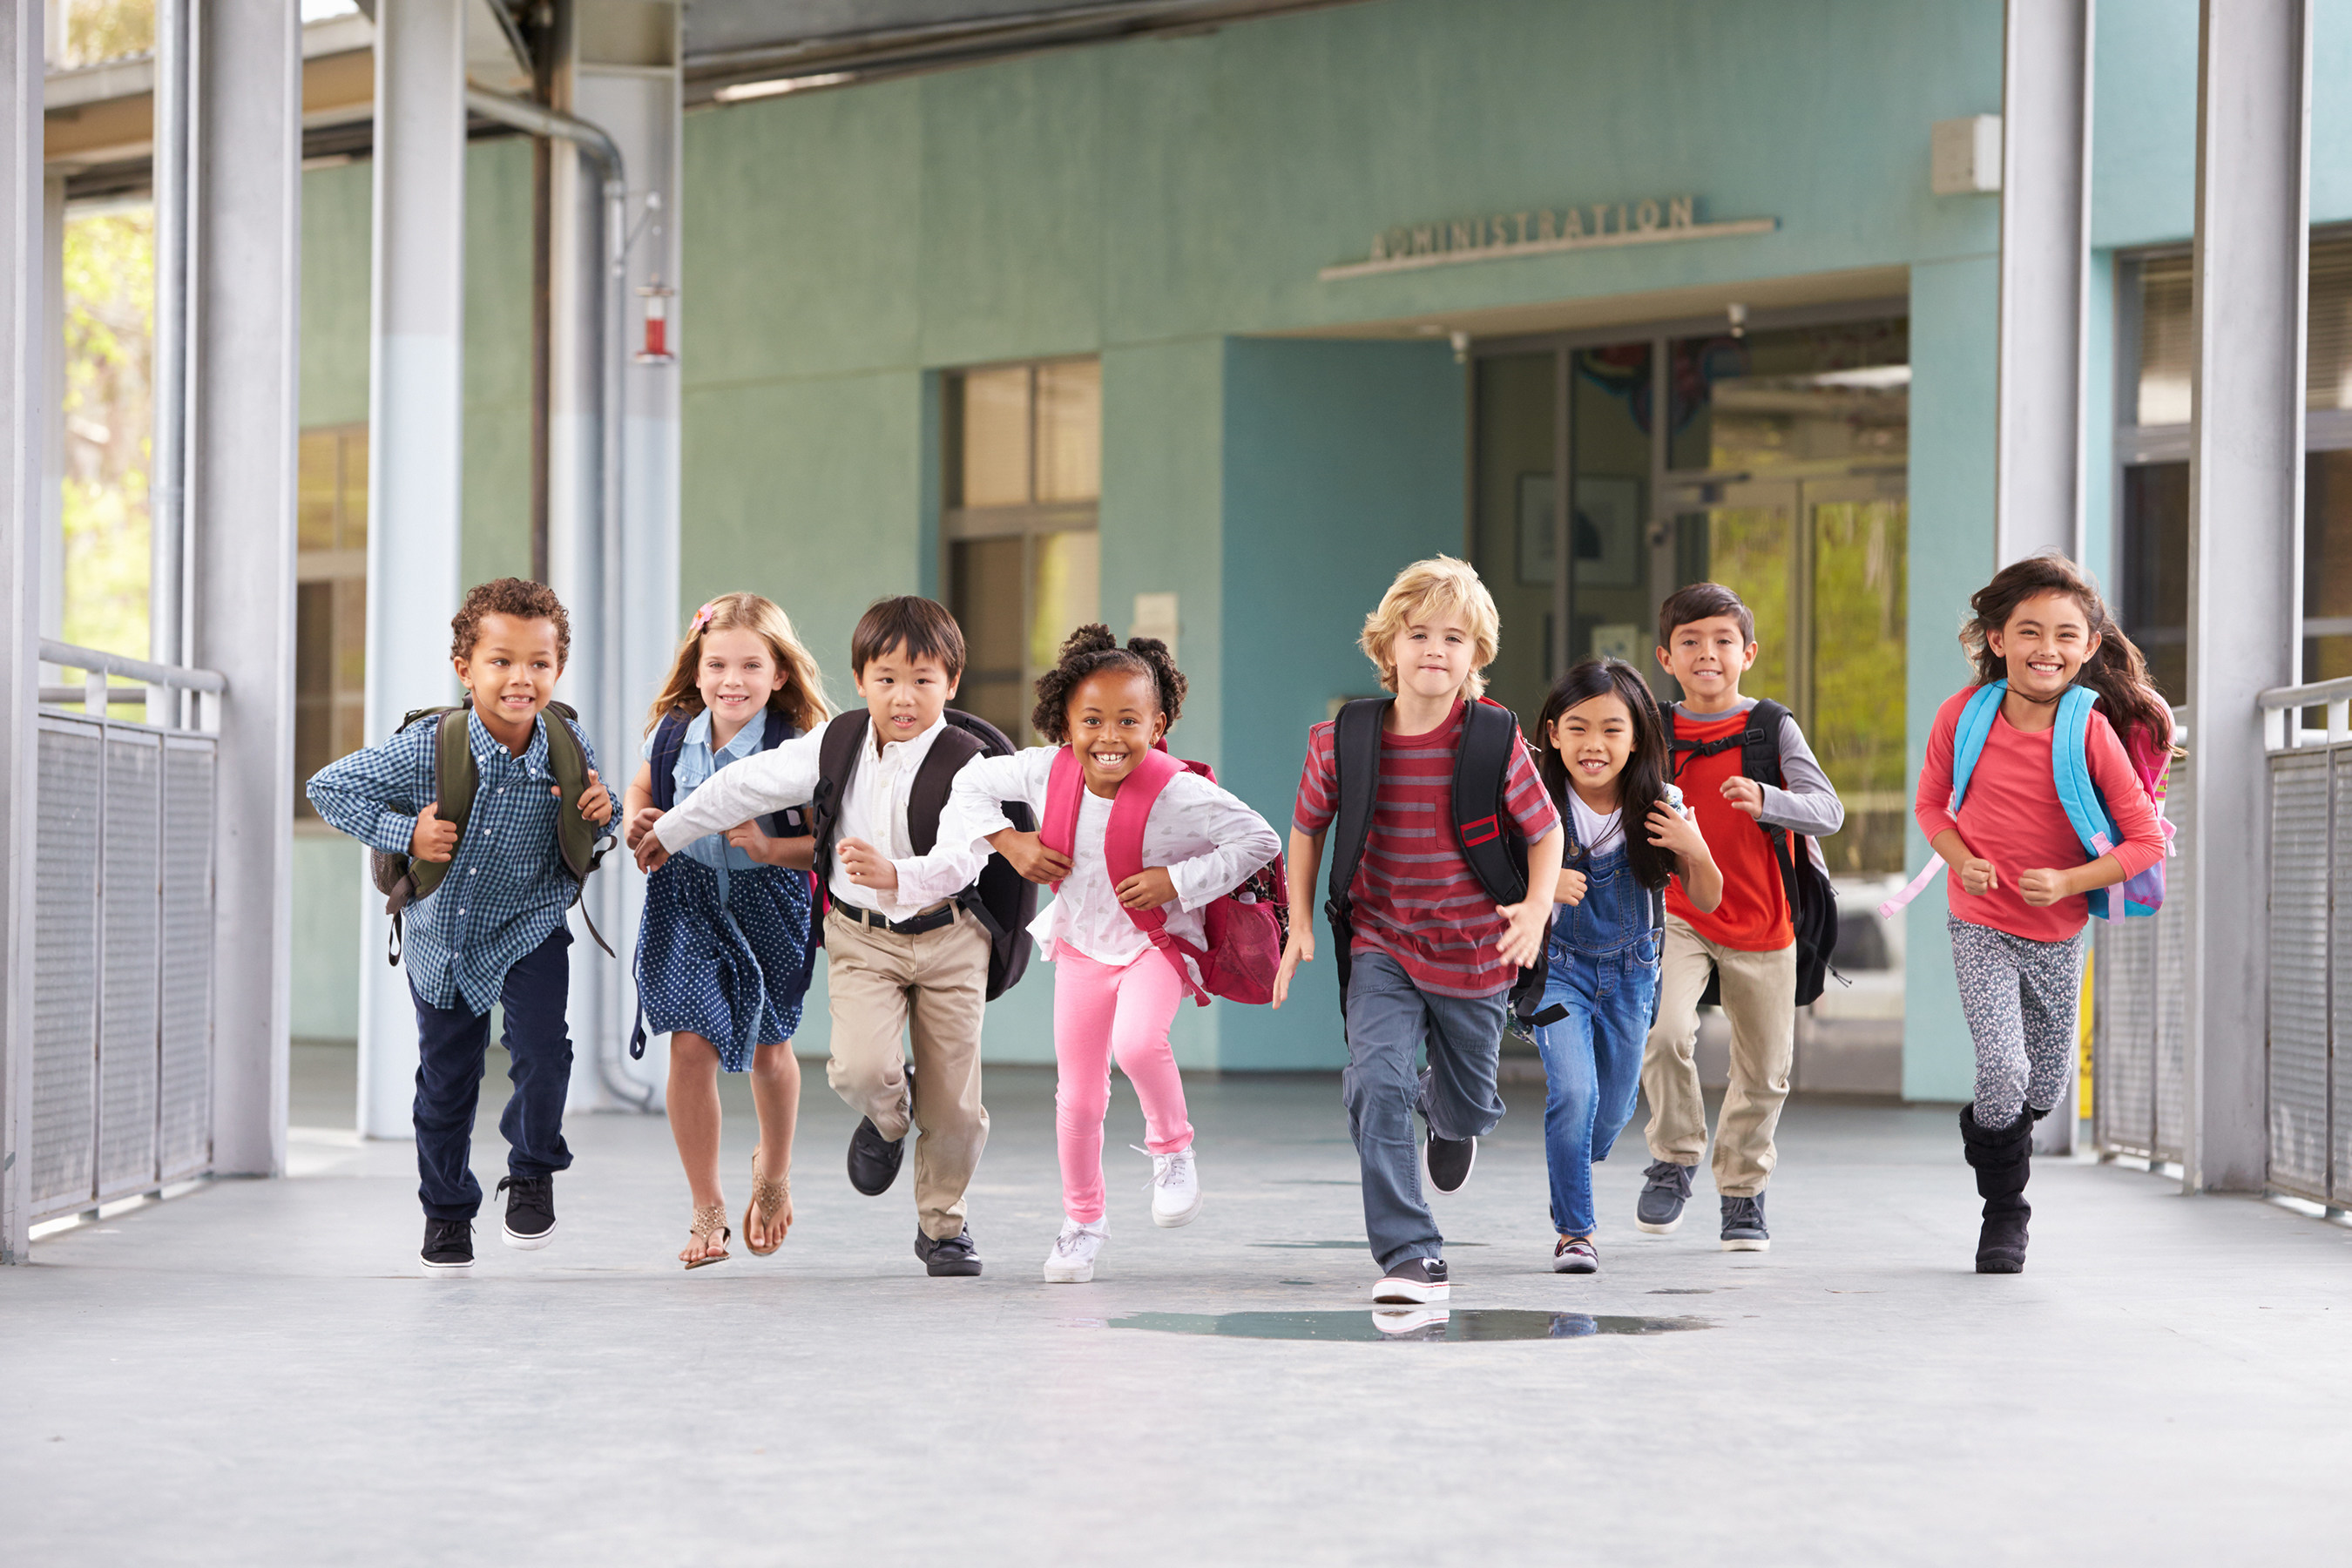 Research shows children who are physically active and well nourished are better prepared to learn in school.